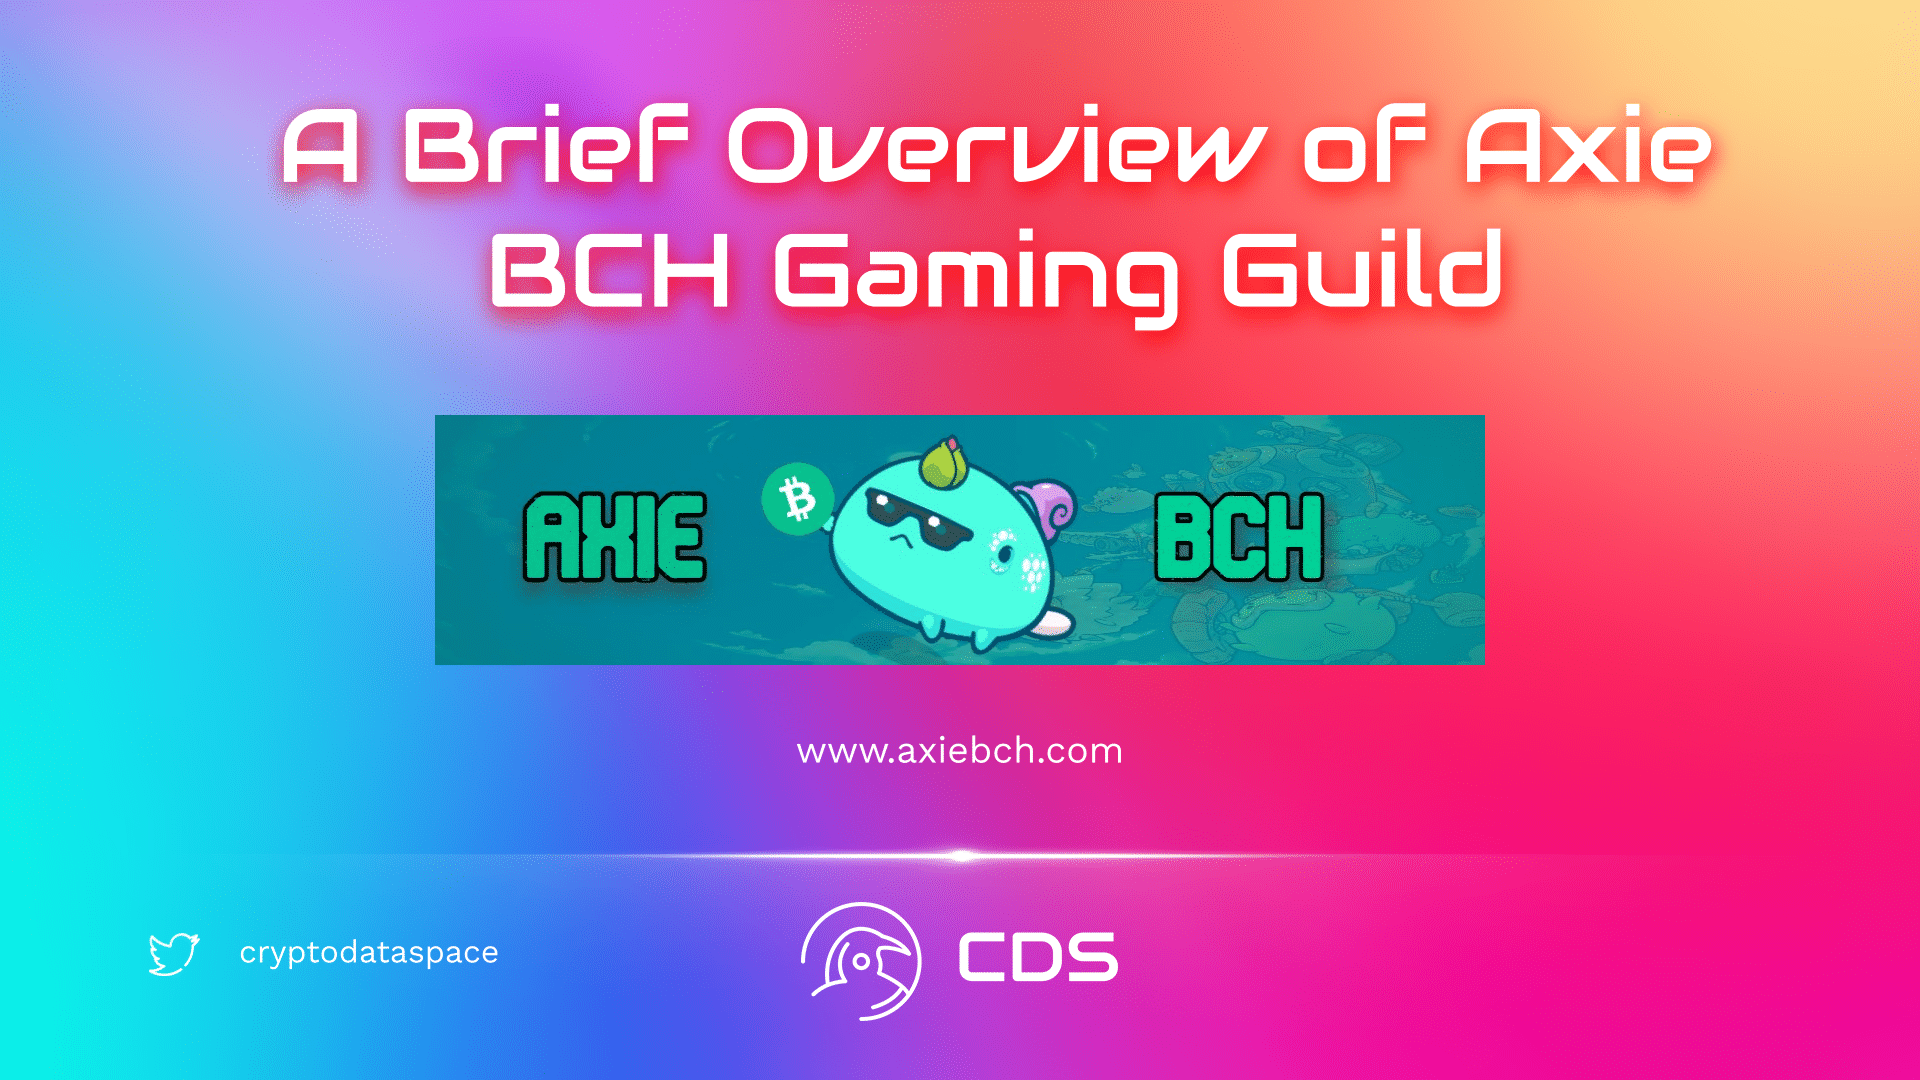 A Brief Overview of Axie BCH Gaming Guild